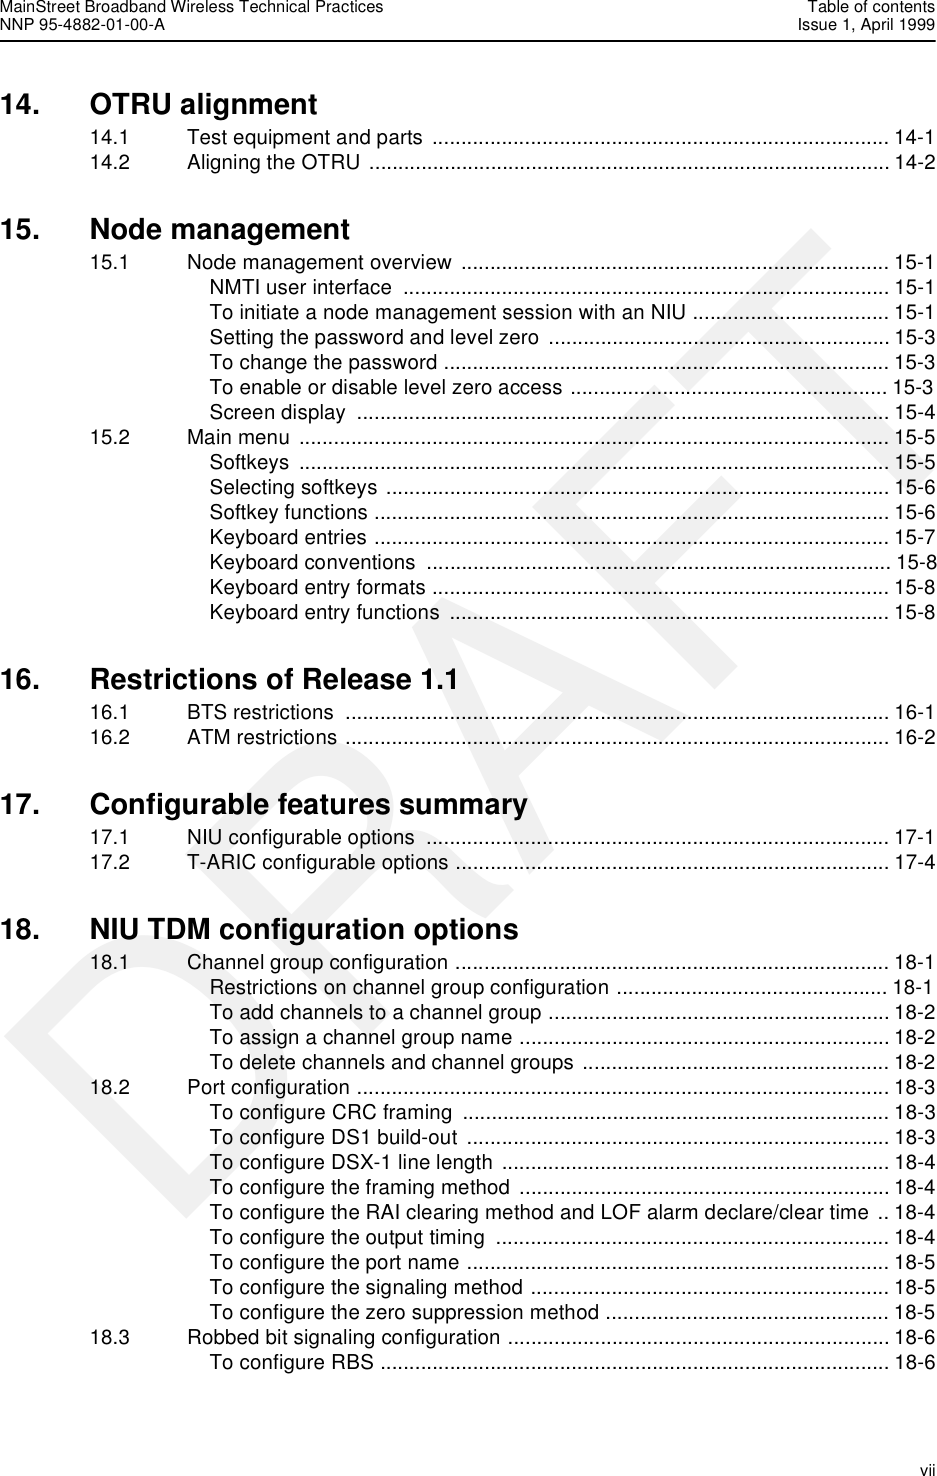 MainStreet Broadband Wireless Technical Practices Table of contentsNNP 95-4882-01-00-A Issue 1, April 1999   viiDRAFT14. OTRU alignment 14.1 Test equipment and parts  ............................................................................... 14-114.2 Aligning the OTRU .......................................................................................... 14-215. Node management15.1 Node management overview .......................................................................... 15-1NMTI user interface  .................................................................................... 15-1To initiate a node management session with an NIU .................................. 15-1Setting the password and level zero  ........................................................... 15-3To change the password ............................................................................. 15-3To enable or disable level zero access ....................................................... 15-3Screen display  ............................................................................................ 15-415.2 Main menu ...................................................................................................... 15-5Softkeys ...................................................................................................... 15-5Selecting softkeys ....................................................................................... 15-6Softkey functions ......................................................................................... 15-6Keyboard entries ......................................................................................... 15-7Keyboard conventions  ................................................................................ 15-8Keyboard entry formats ............................................................................... 15-8Keyboard entry functions  ............................................................................ 15-816. Restrictions of Release 1.116.1 BTS restrictions  .............................................................................................. 16-116.2 ATM restrictions .............................................................................................. 16-217. Configurable features summary17.1 NIU configurable options  ................................................................................ 17-117.2 T-ARIC configurable options ........................................................................... 17-418. NIU TDM configuration options18.1 Channel group configuration ........................................................................... 18-1Restrictions on channel group configuration ............................................... 18-1To add channels to a channel group ........................................................... 18-2To assign a channel group name ................................................................ 18-2To delete channels and channel groups ..................................................... 18-218.2 Port configuration ............................................................................................ 18-3To configure CRC framing  .......................................................................... 18-3To configure DS1 build-out  ......................................................................... 18-3To configure DSX-1 line length ................................................................... 18-4To configure the framing method ................................................................ 18-4To configure the RAI clearing method and LOF alarm declare/clear time .. 18-4To configure the output timing  .................................................................... 18-4To configure the port name ......................................................................... 18-5To configure the signaling method .............................................................. 18-5To configure the zero suppression method ................................................. 18-518.3 Robbed bit signaling configuration .................................................................. 18-6To configure RBS ........................................................................................ 18-6